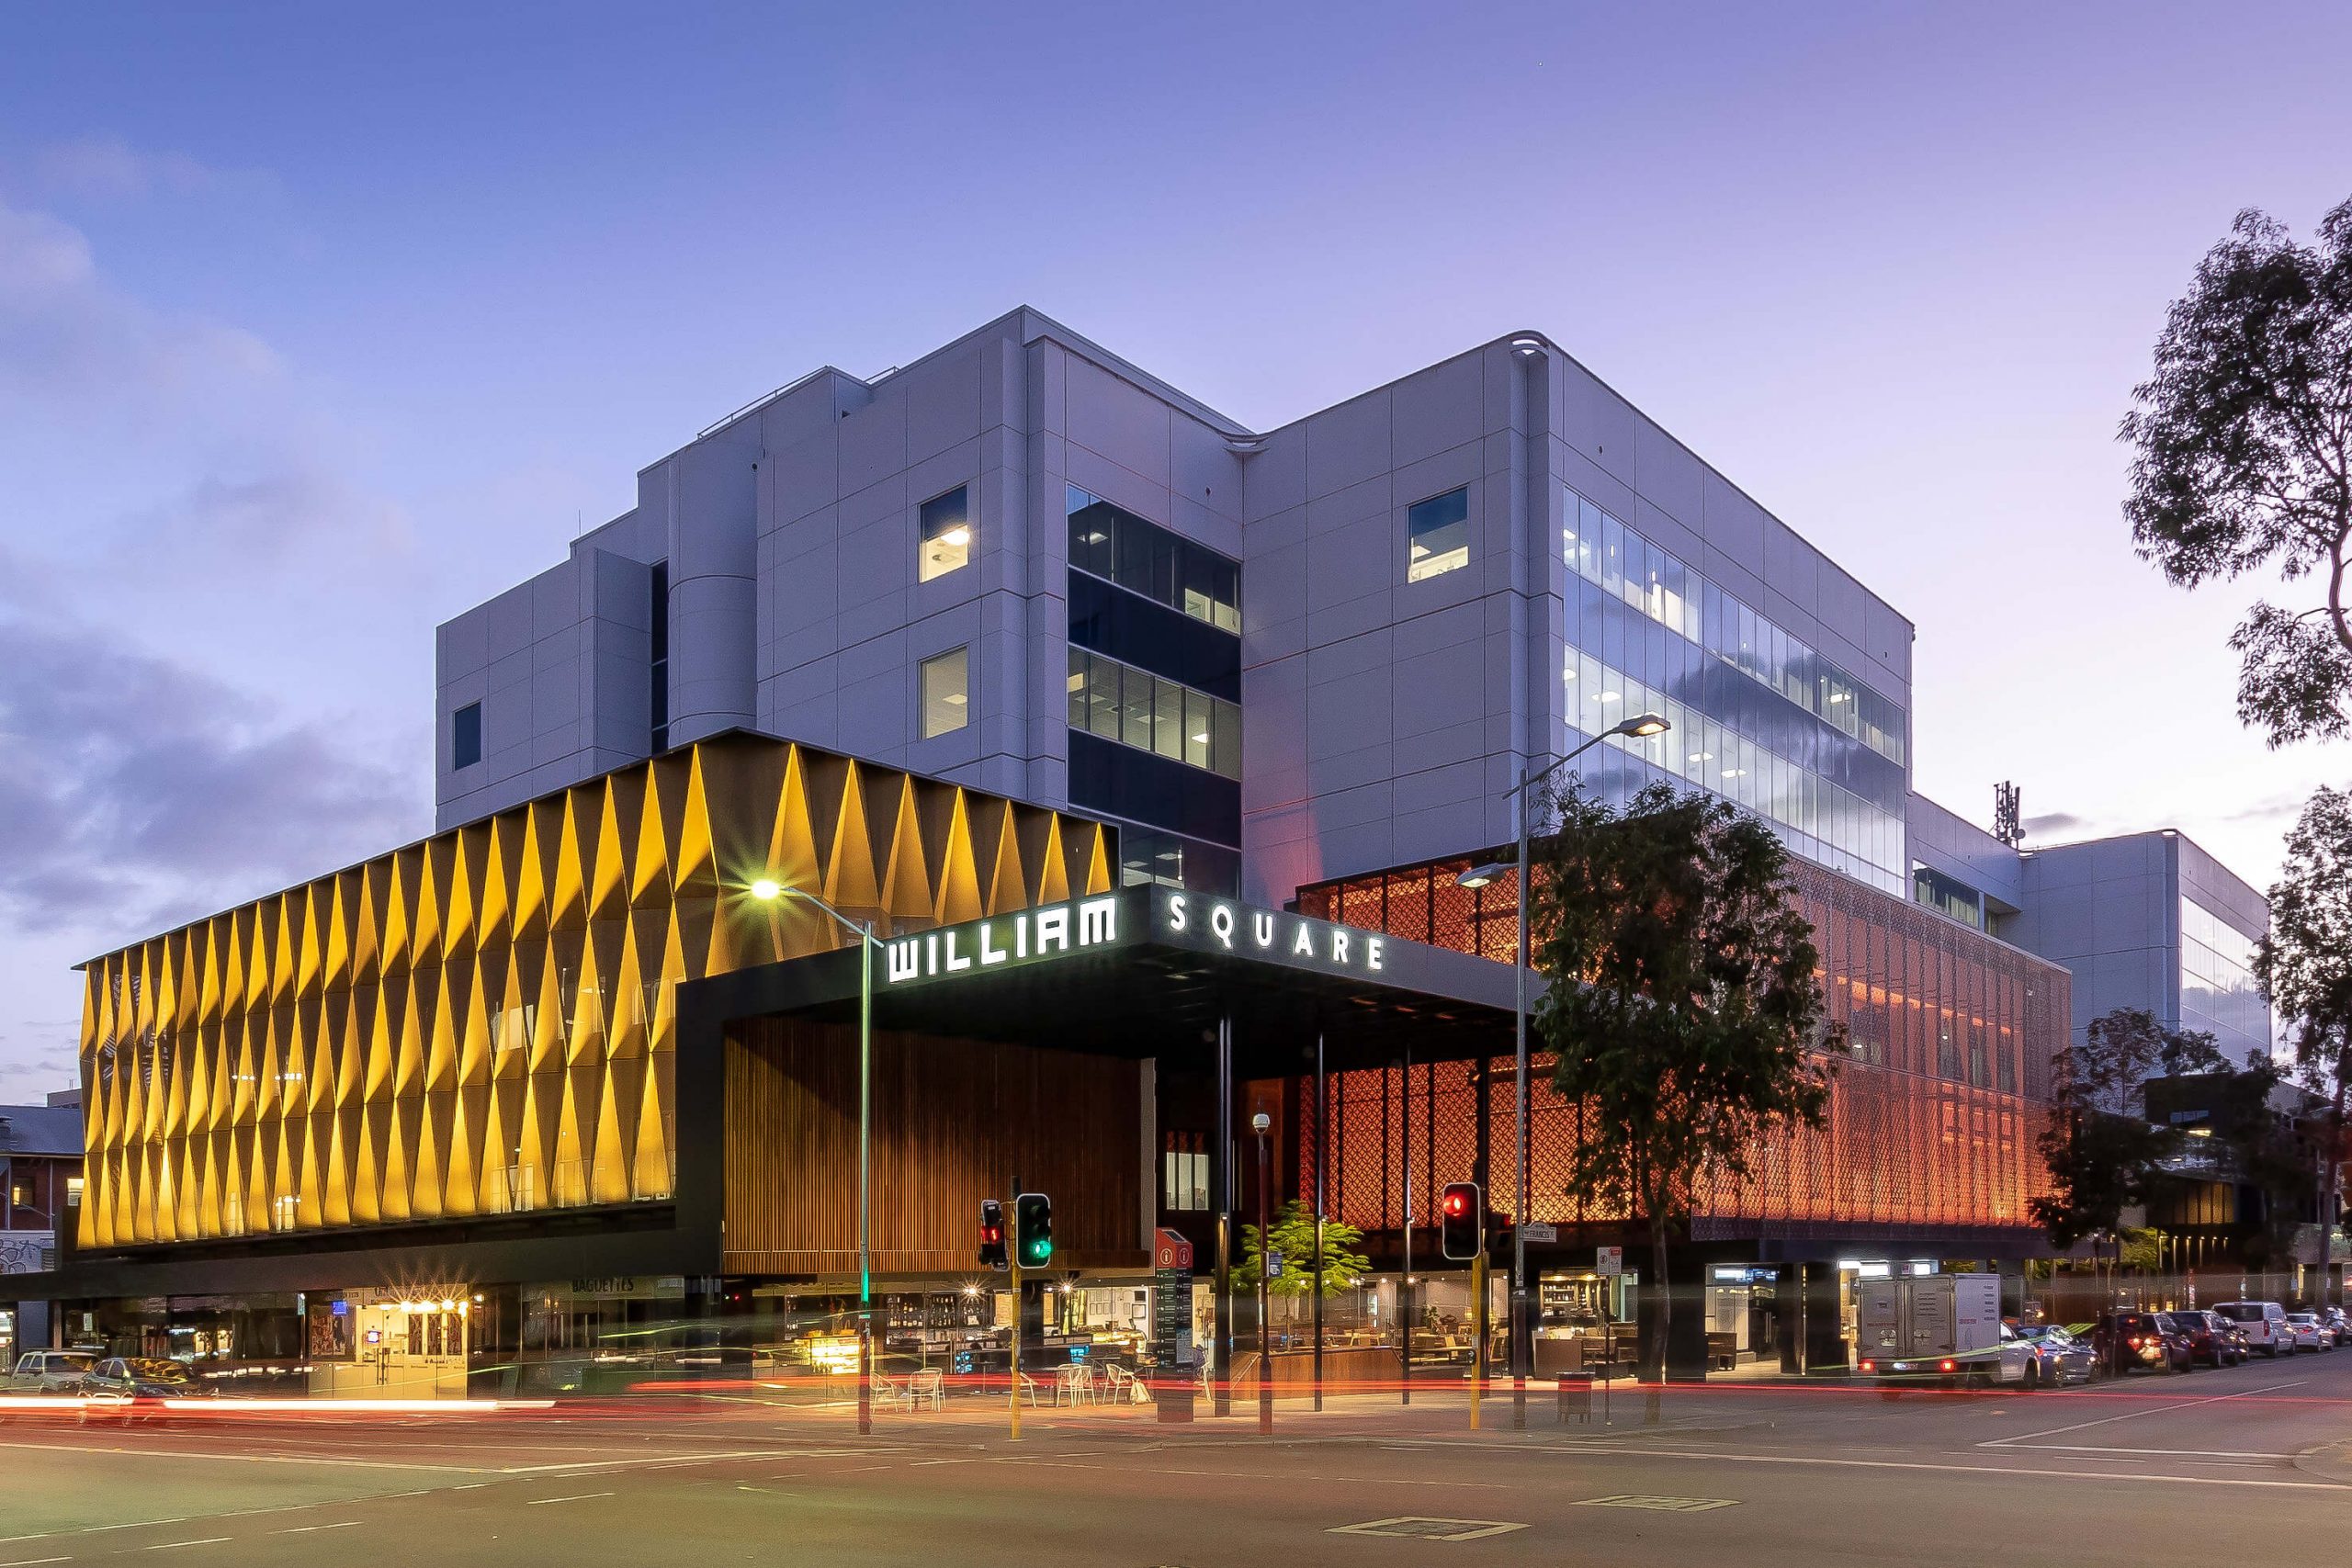 william square fitout by Cablewise - commercial electrical contractors in perth - William Square